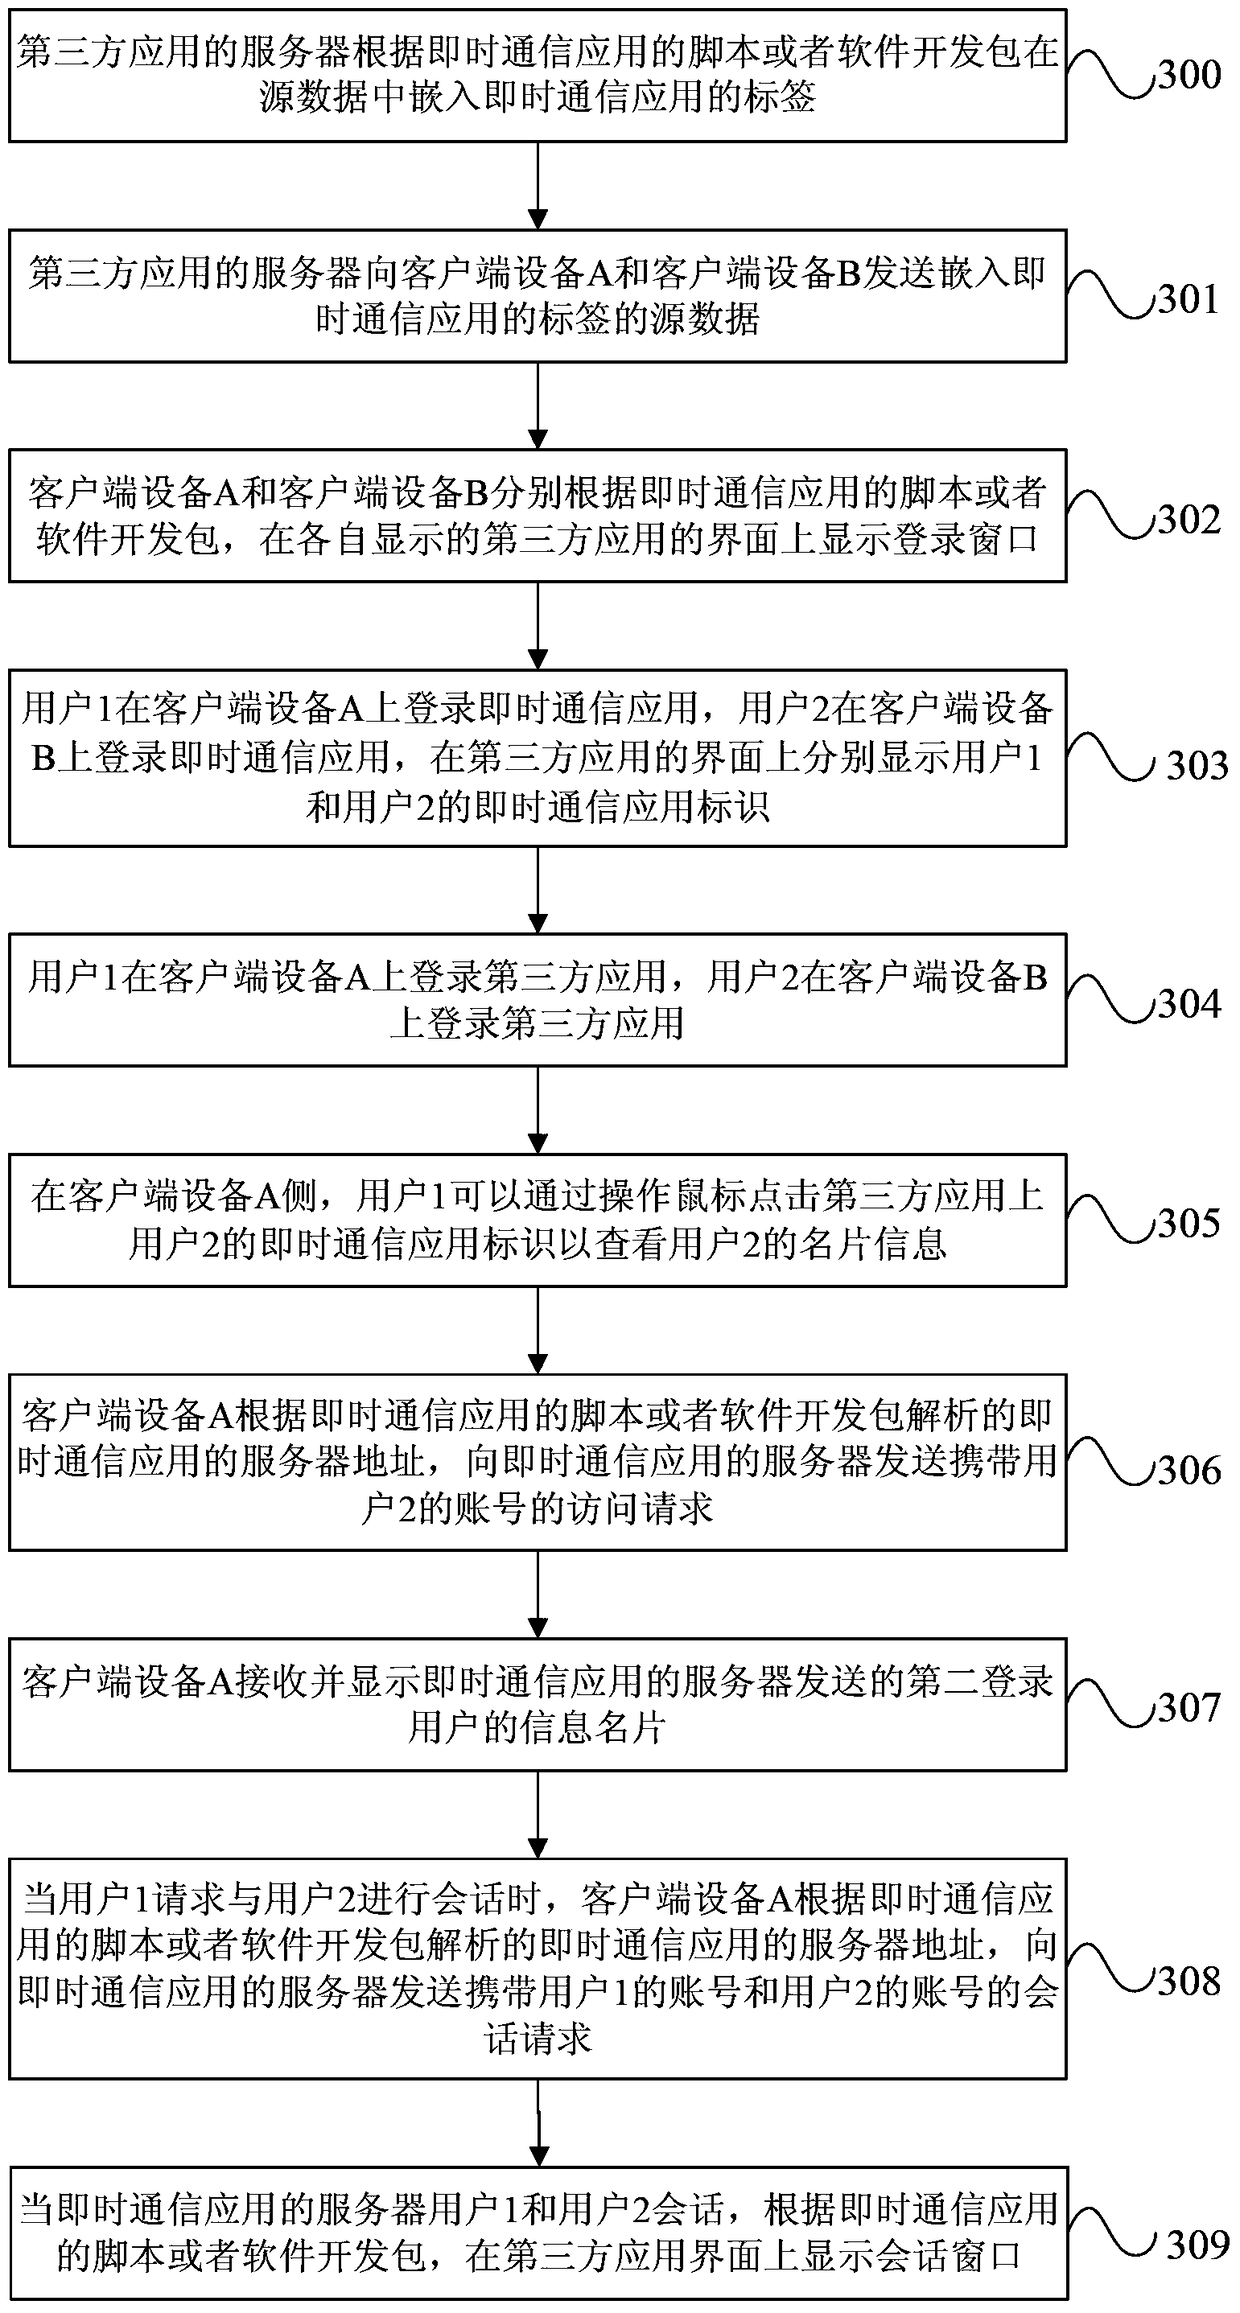 Realization method, system, and device of instant messaging application